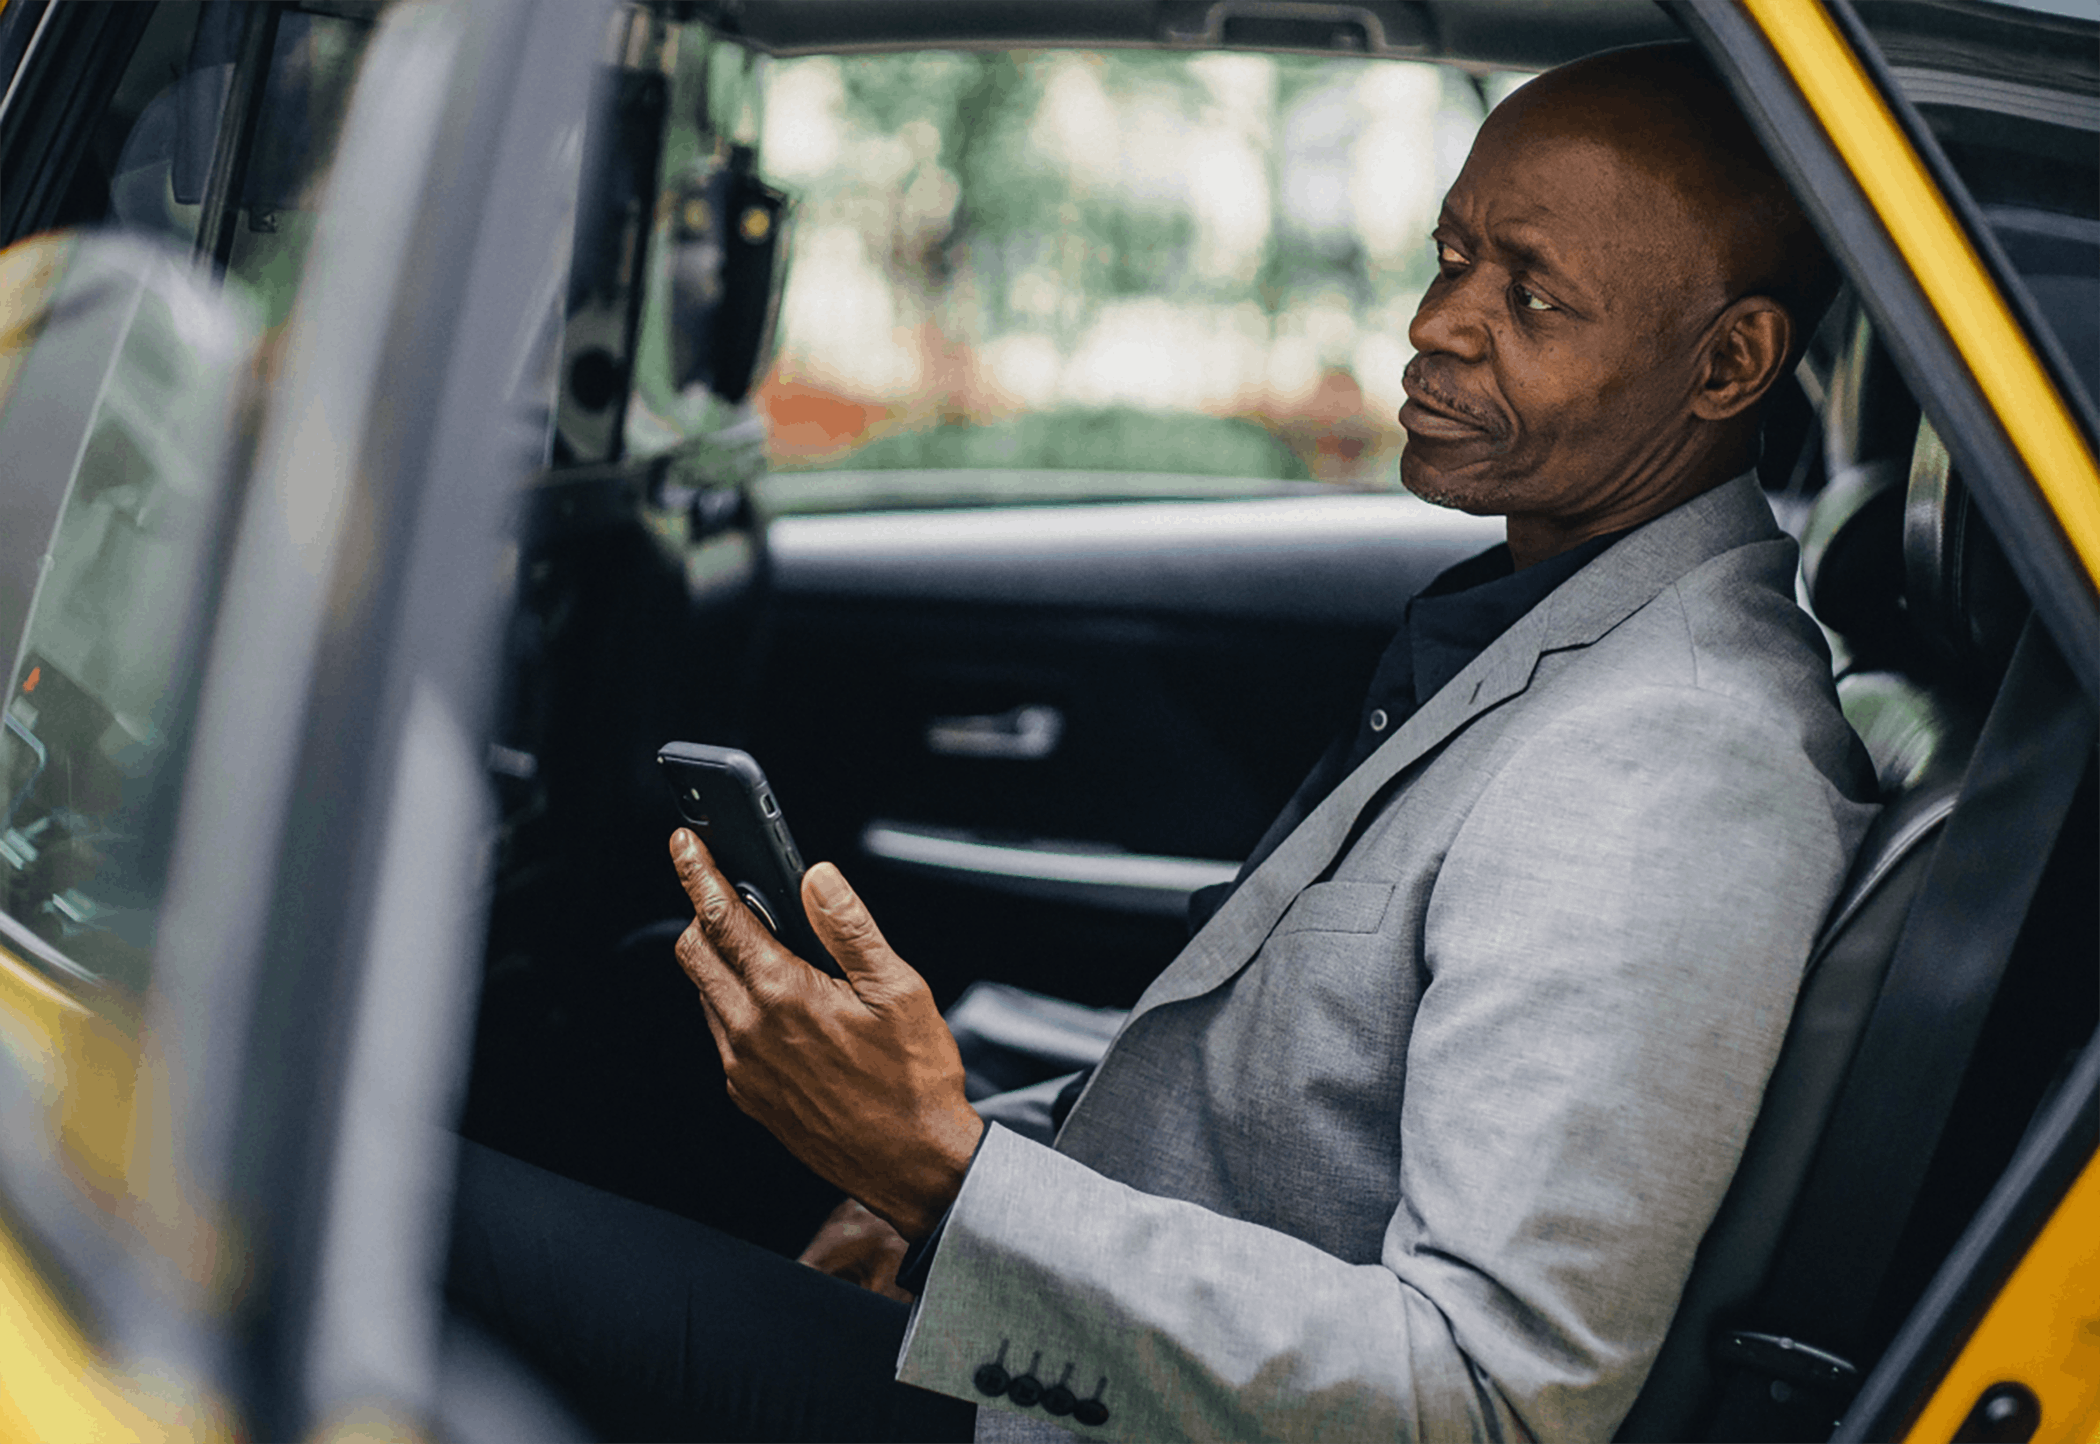 Man texting while traveling by cab